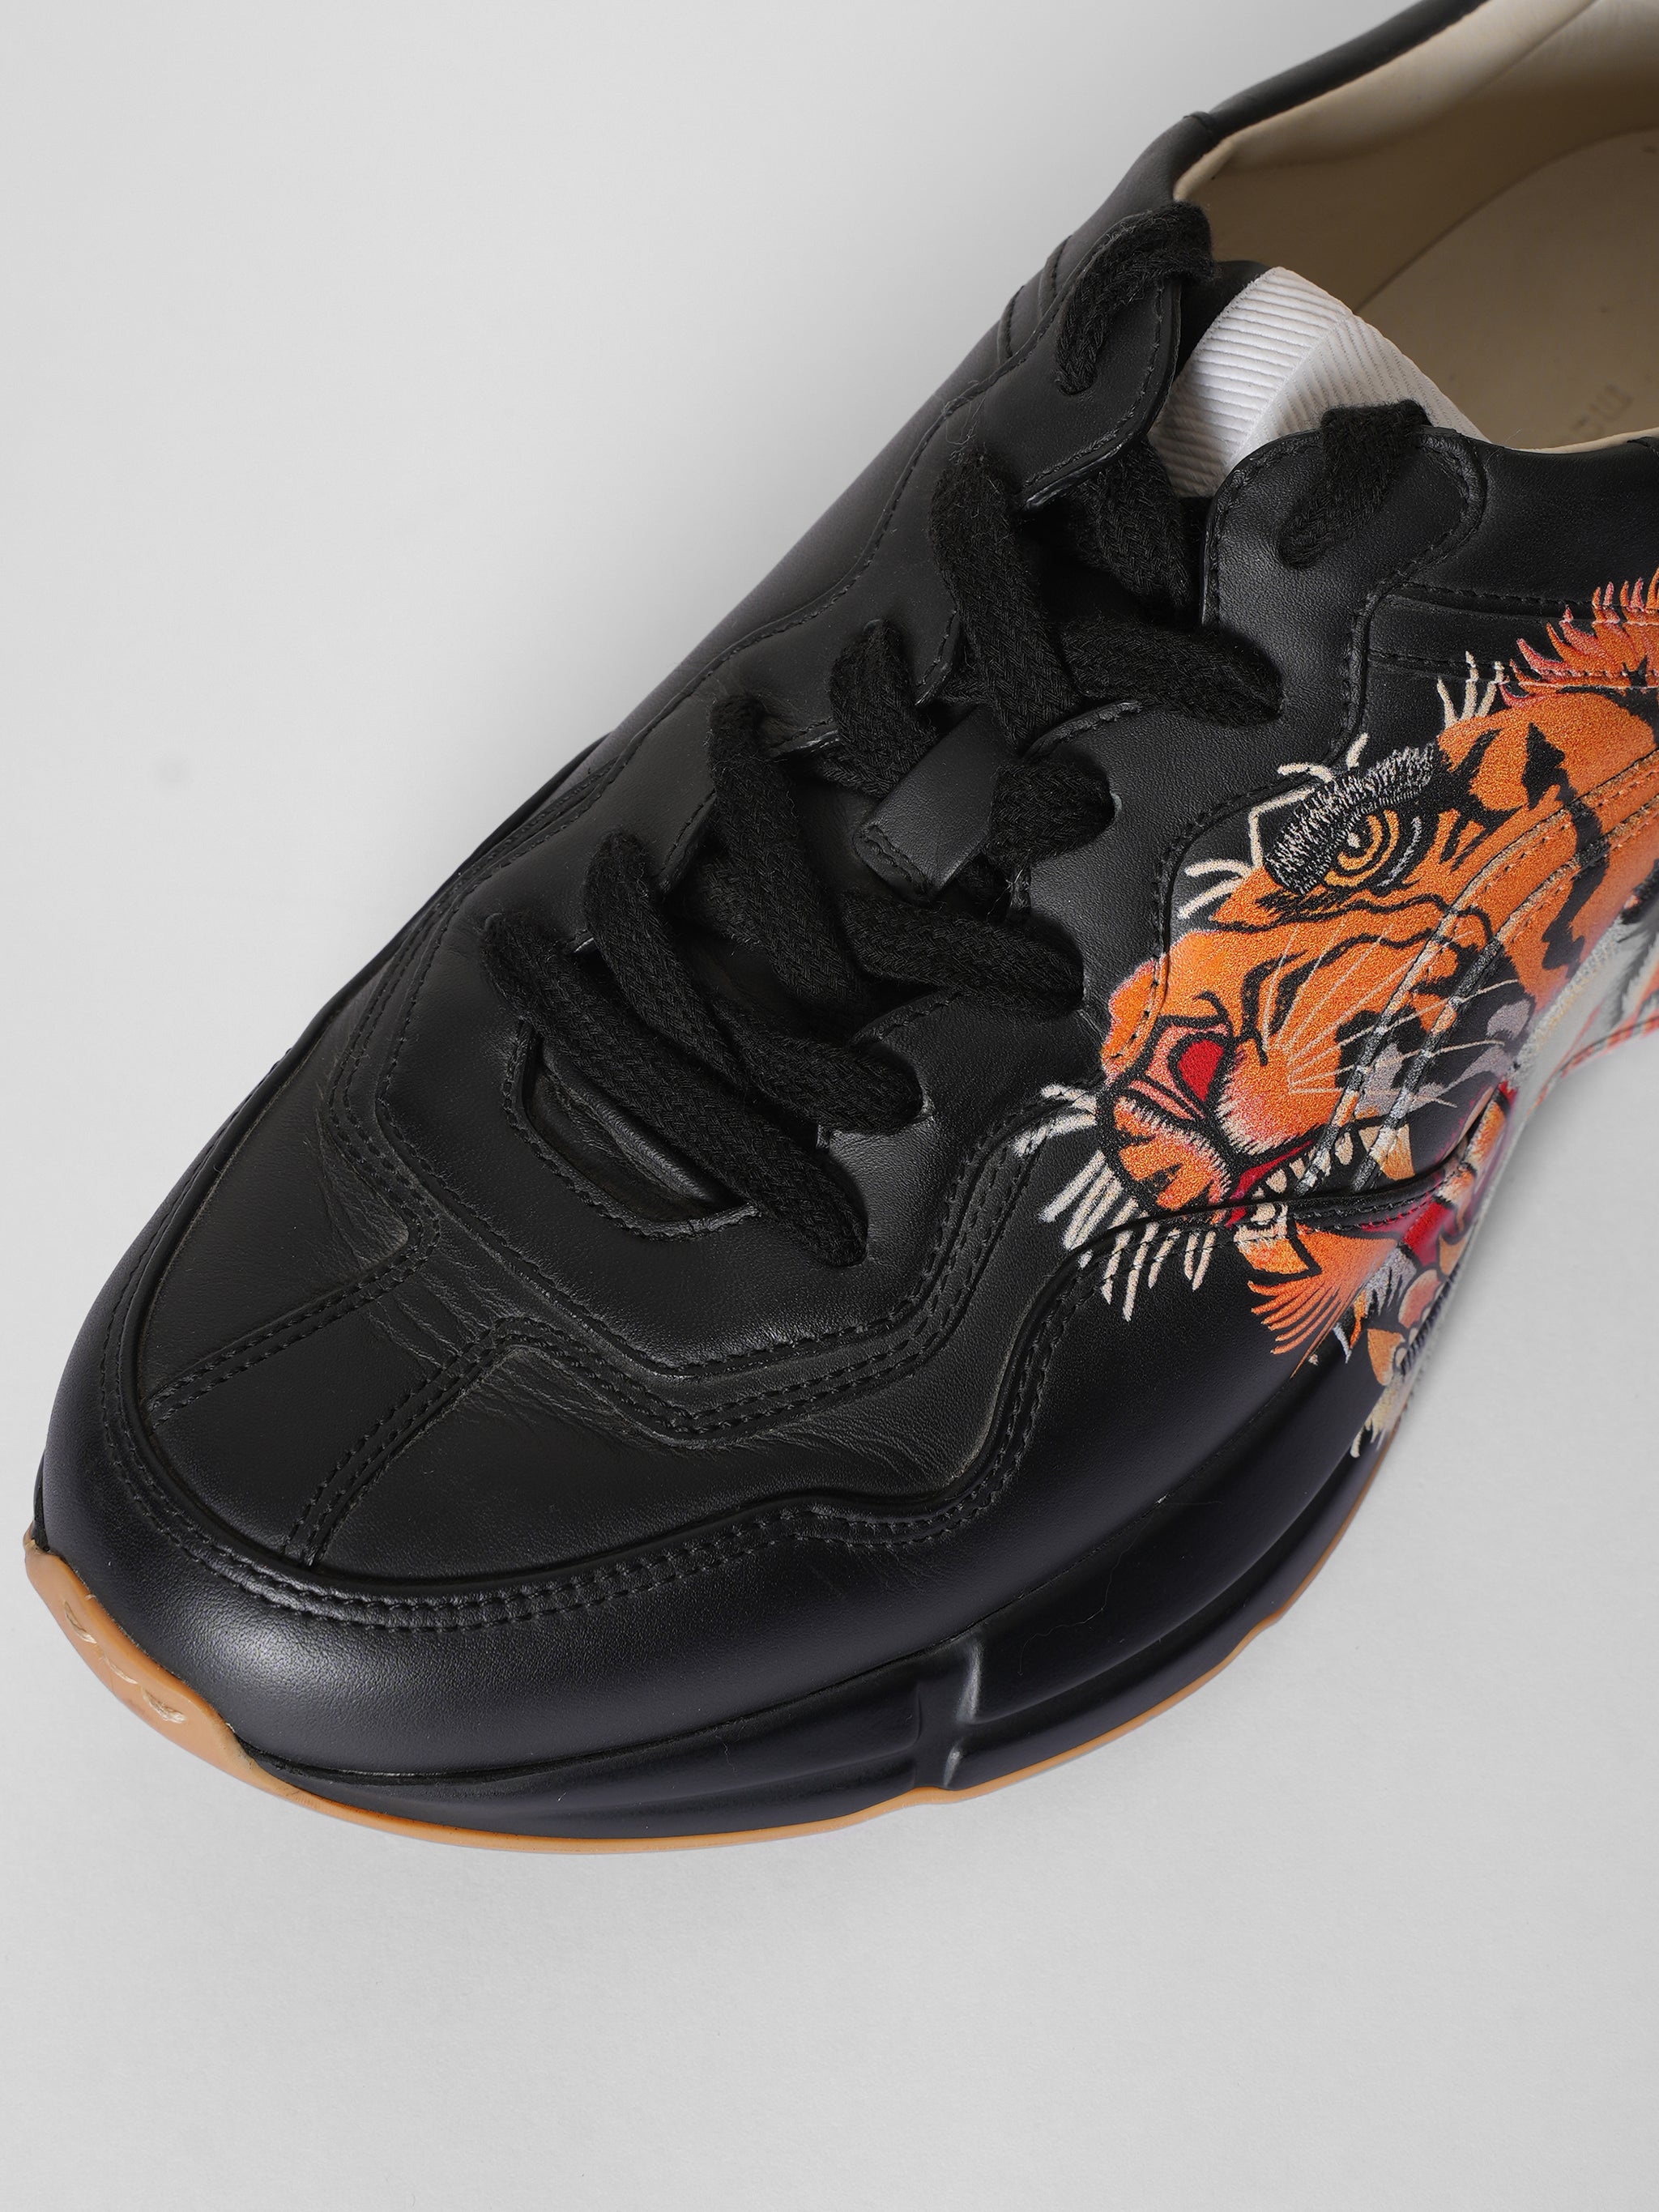 Gucci Black Leather Tiger Ryton Trainers